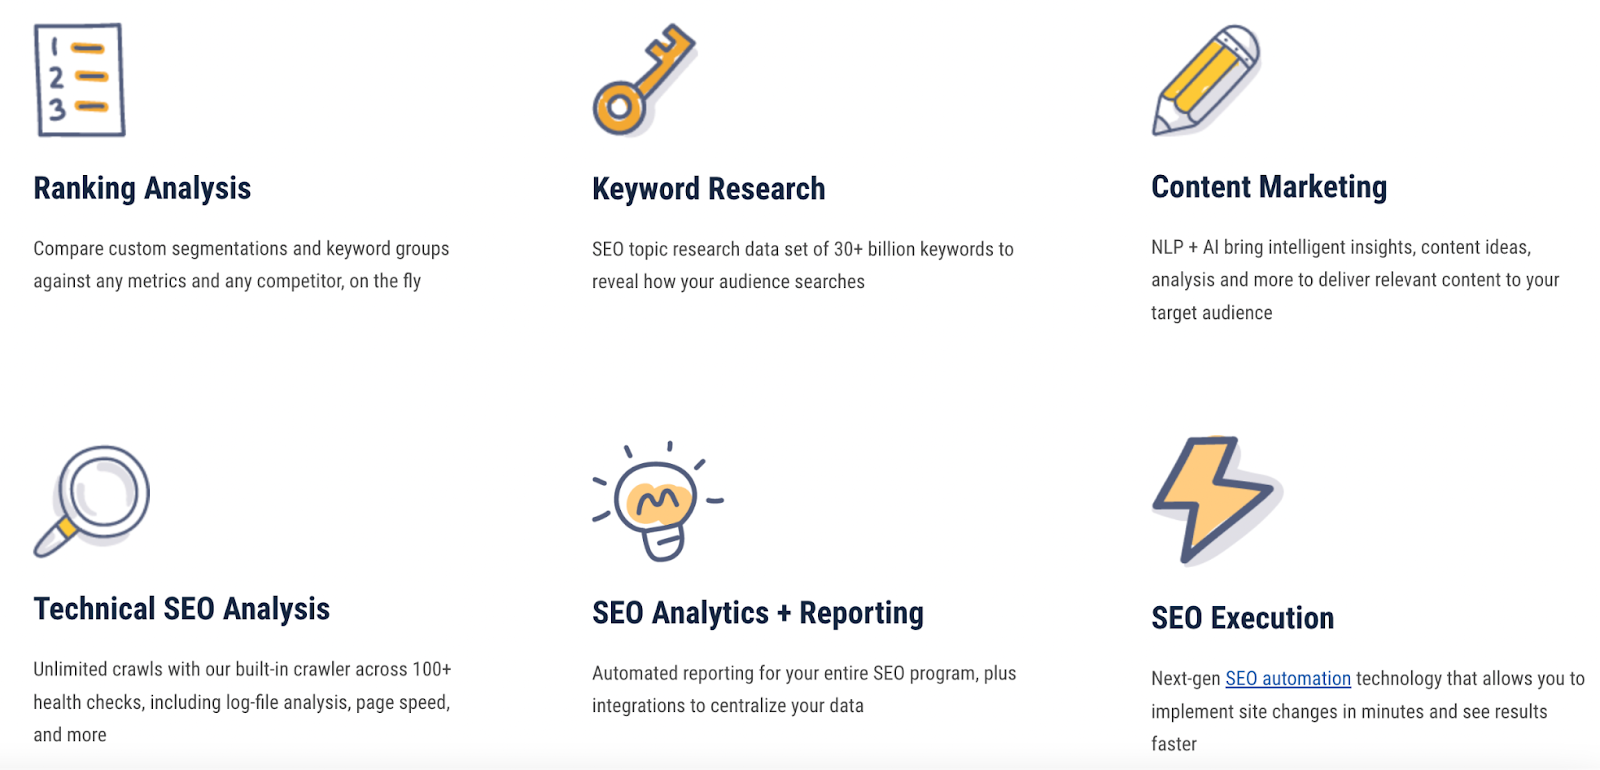 an overview of what seoClarity offers, including ranking analysis, keyword research, content marketing, technical SEO analysis, SEO analytics + reporting and SEO execution